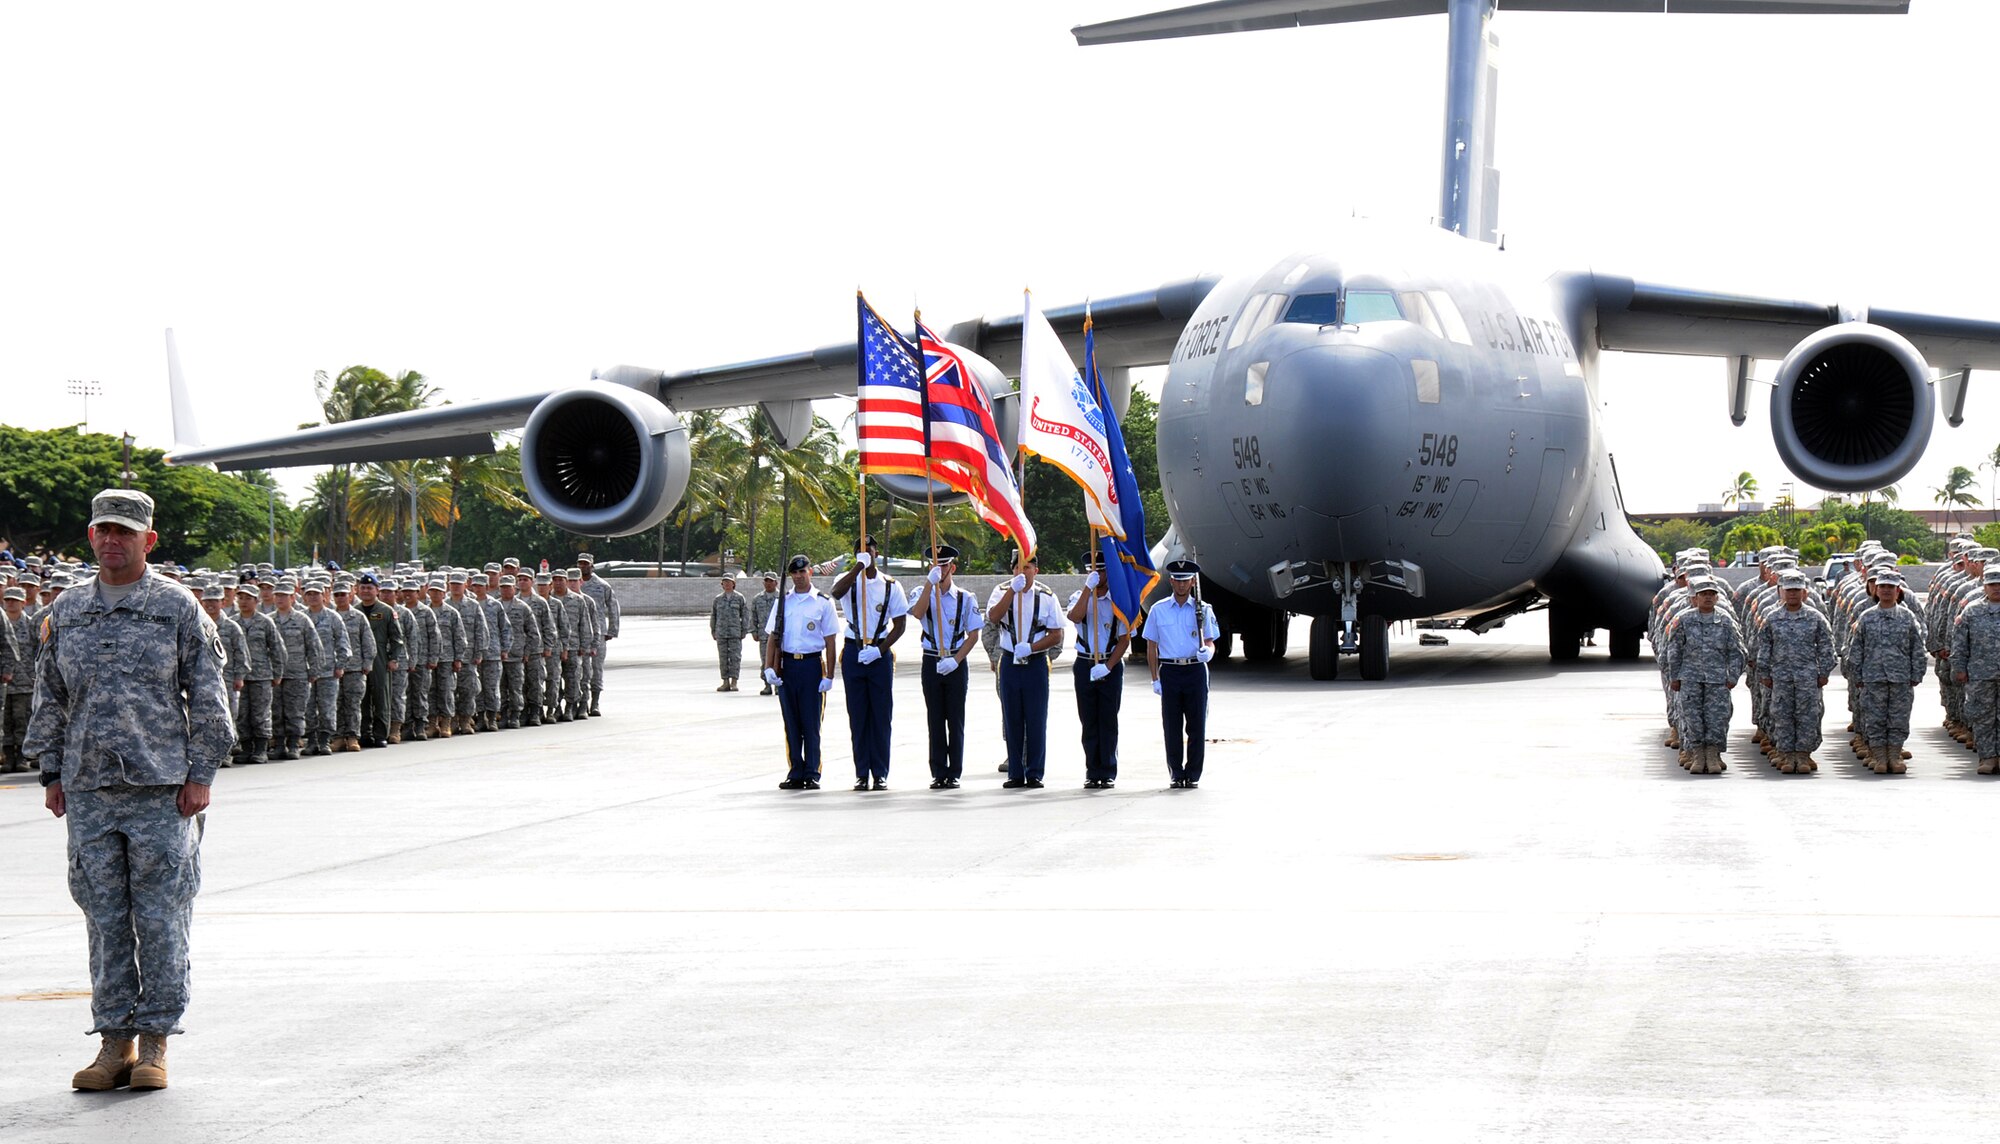 Members of the Hawaii Air and Army National Guard along with the Color Guard stand in formation in front of the C-17 Globemaster III during the retirement ceremony for Maj. Gen. Robert G.F. Lee, Hawaii adjutant general, on Joint Base Pearl Harbor-Hickam, Nov. 6.  Maj. Gen. Lee performed his final troop inspection as the adjutant general as part of the retirement ceremony. (U.S. Air Force photo/Tech. Sgt. Betty J. Squatrito-Martin)